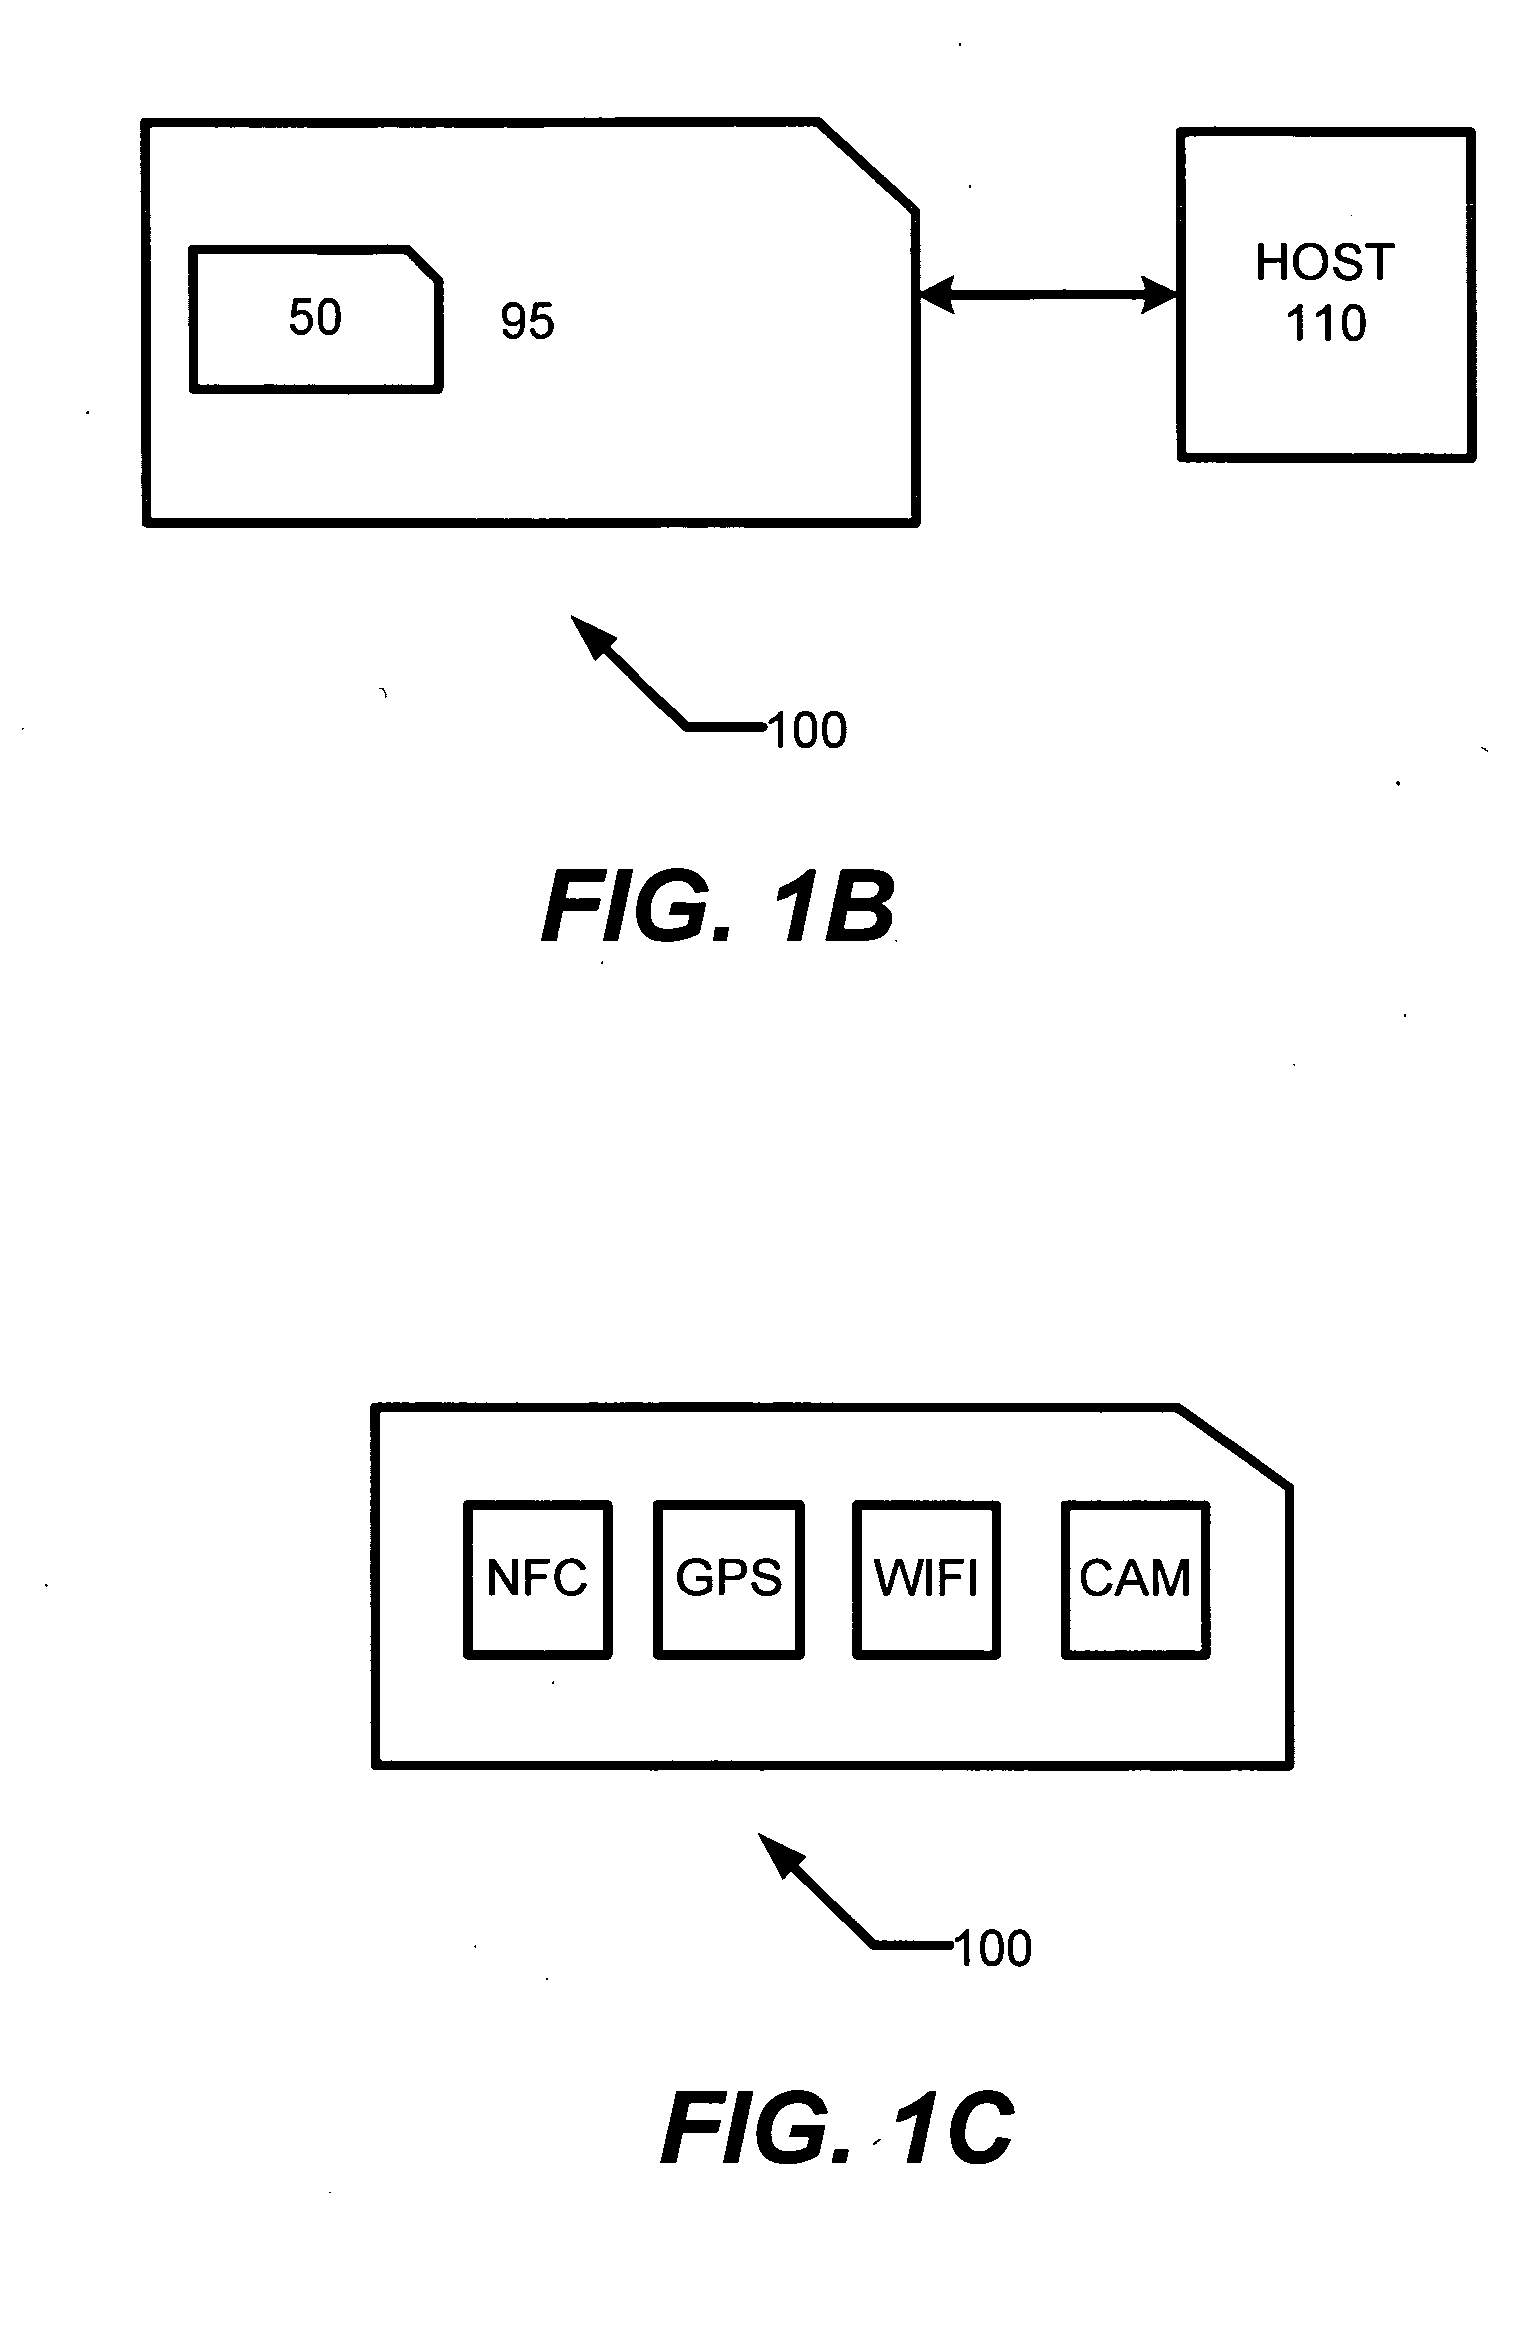 Nested memory system with near field communications capability